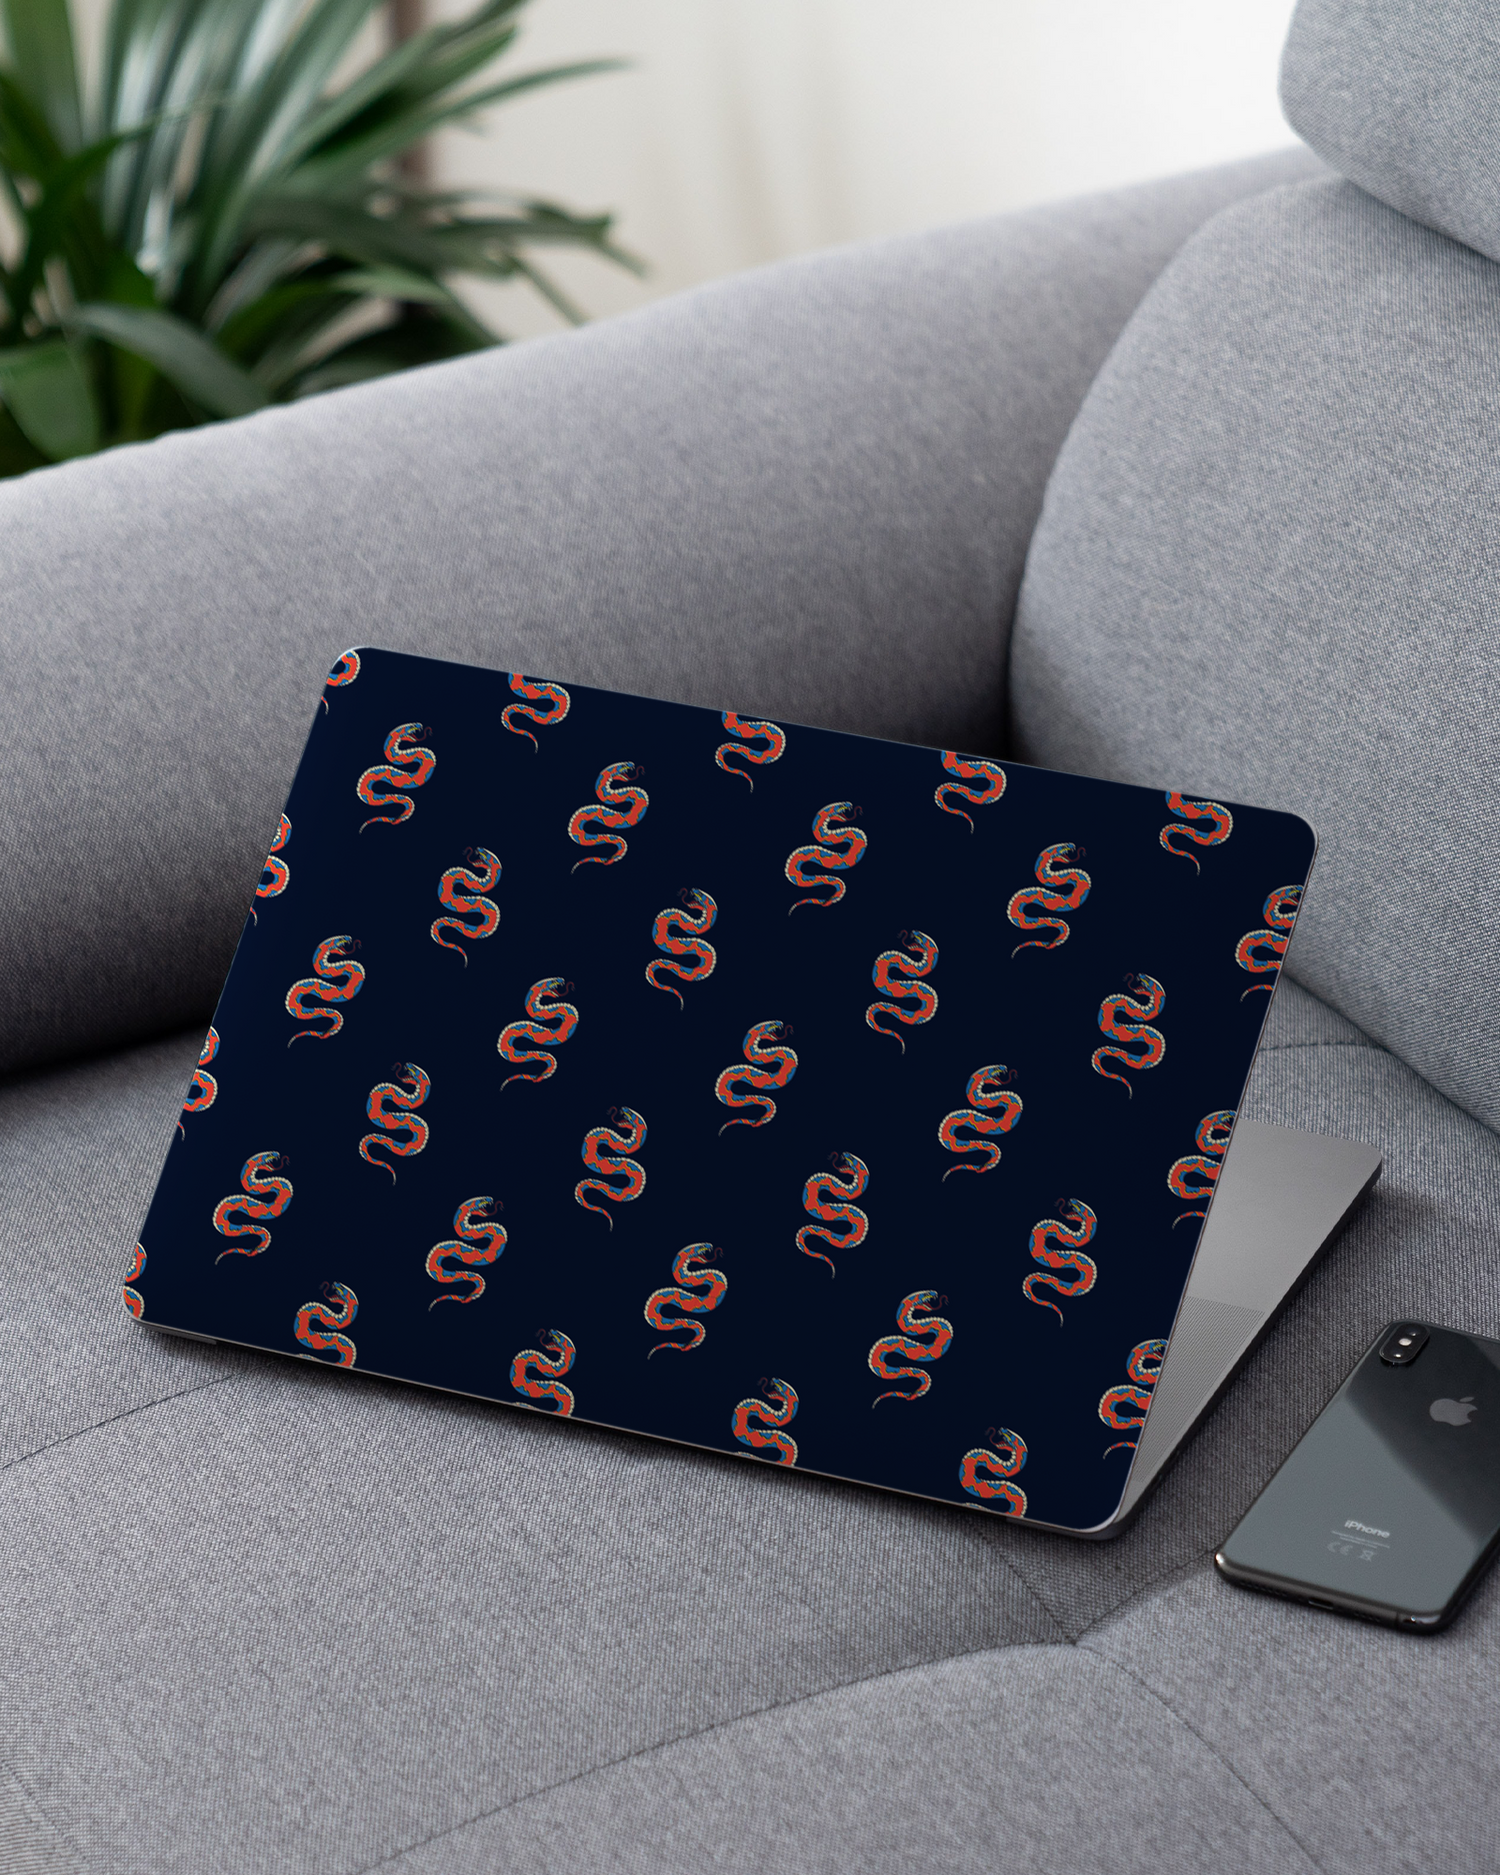 Repeating Snakes Laptop Skin for 13 inch Apple MacBooks on a couch